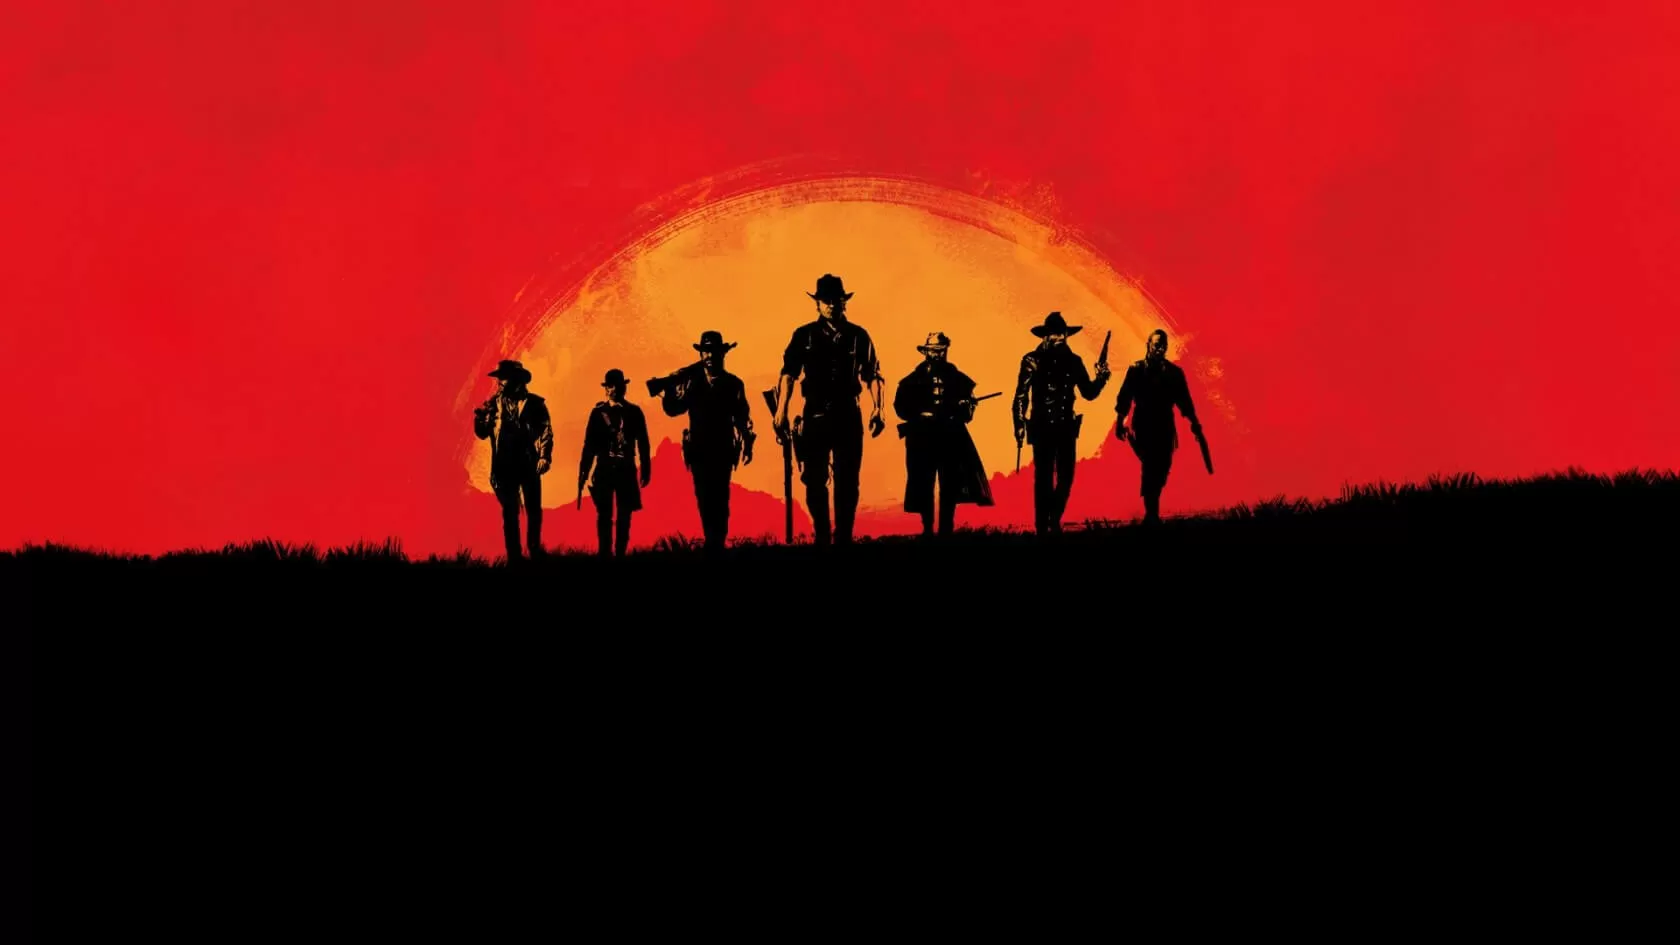 Red Dead Redemption 2 gameplay shows off stunning levels of immersion